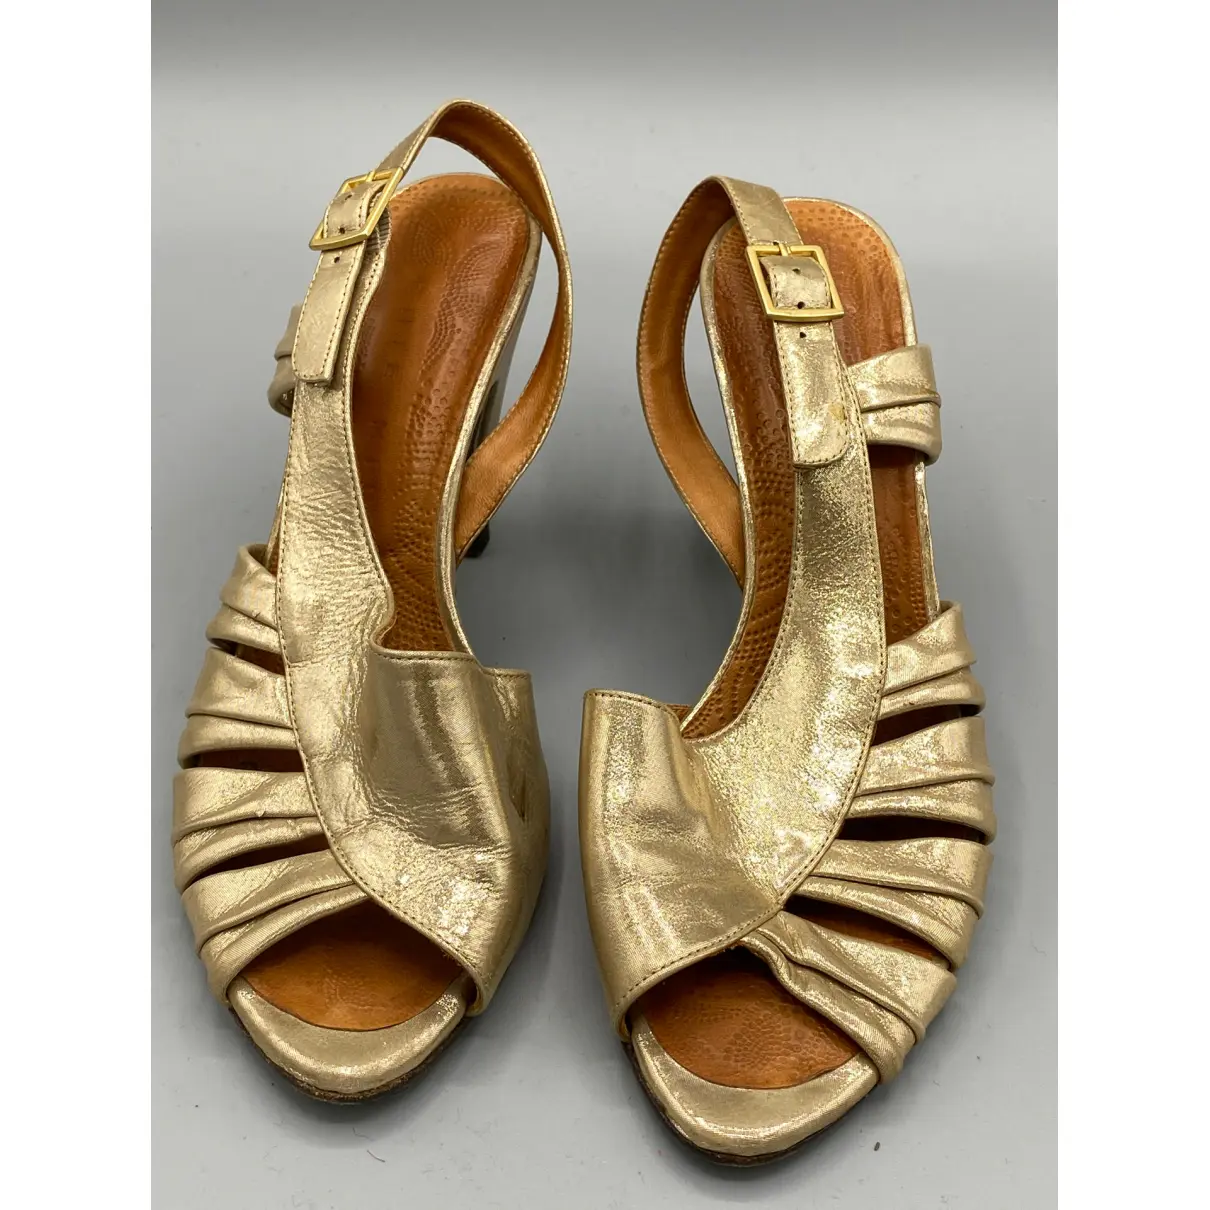 Buy Chie Mihara Cloth sandals online